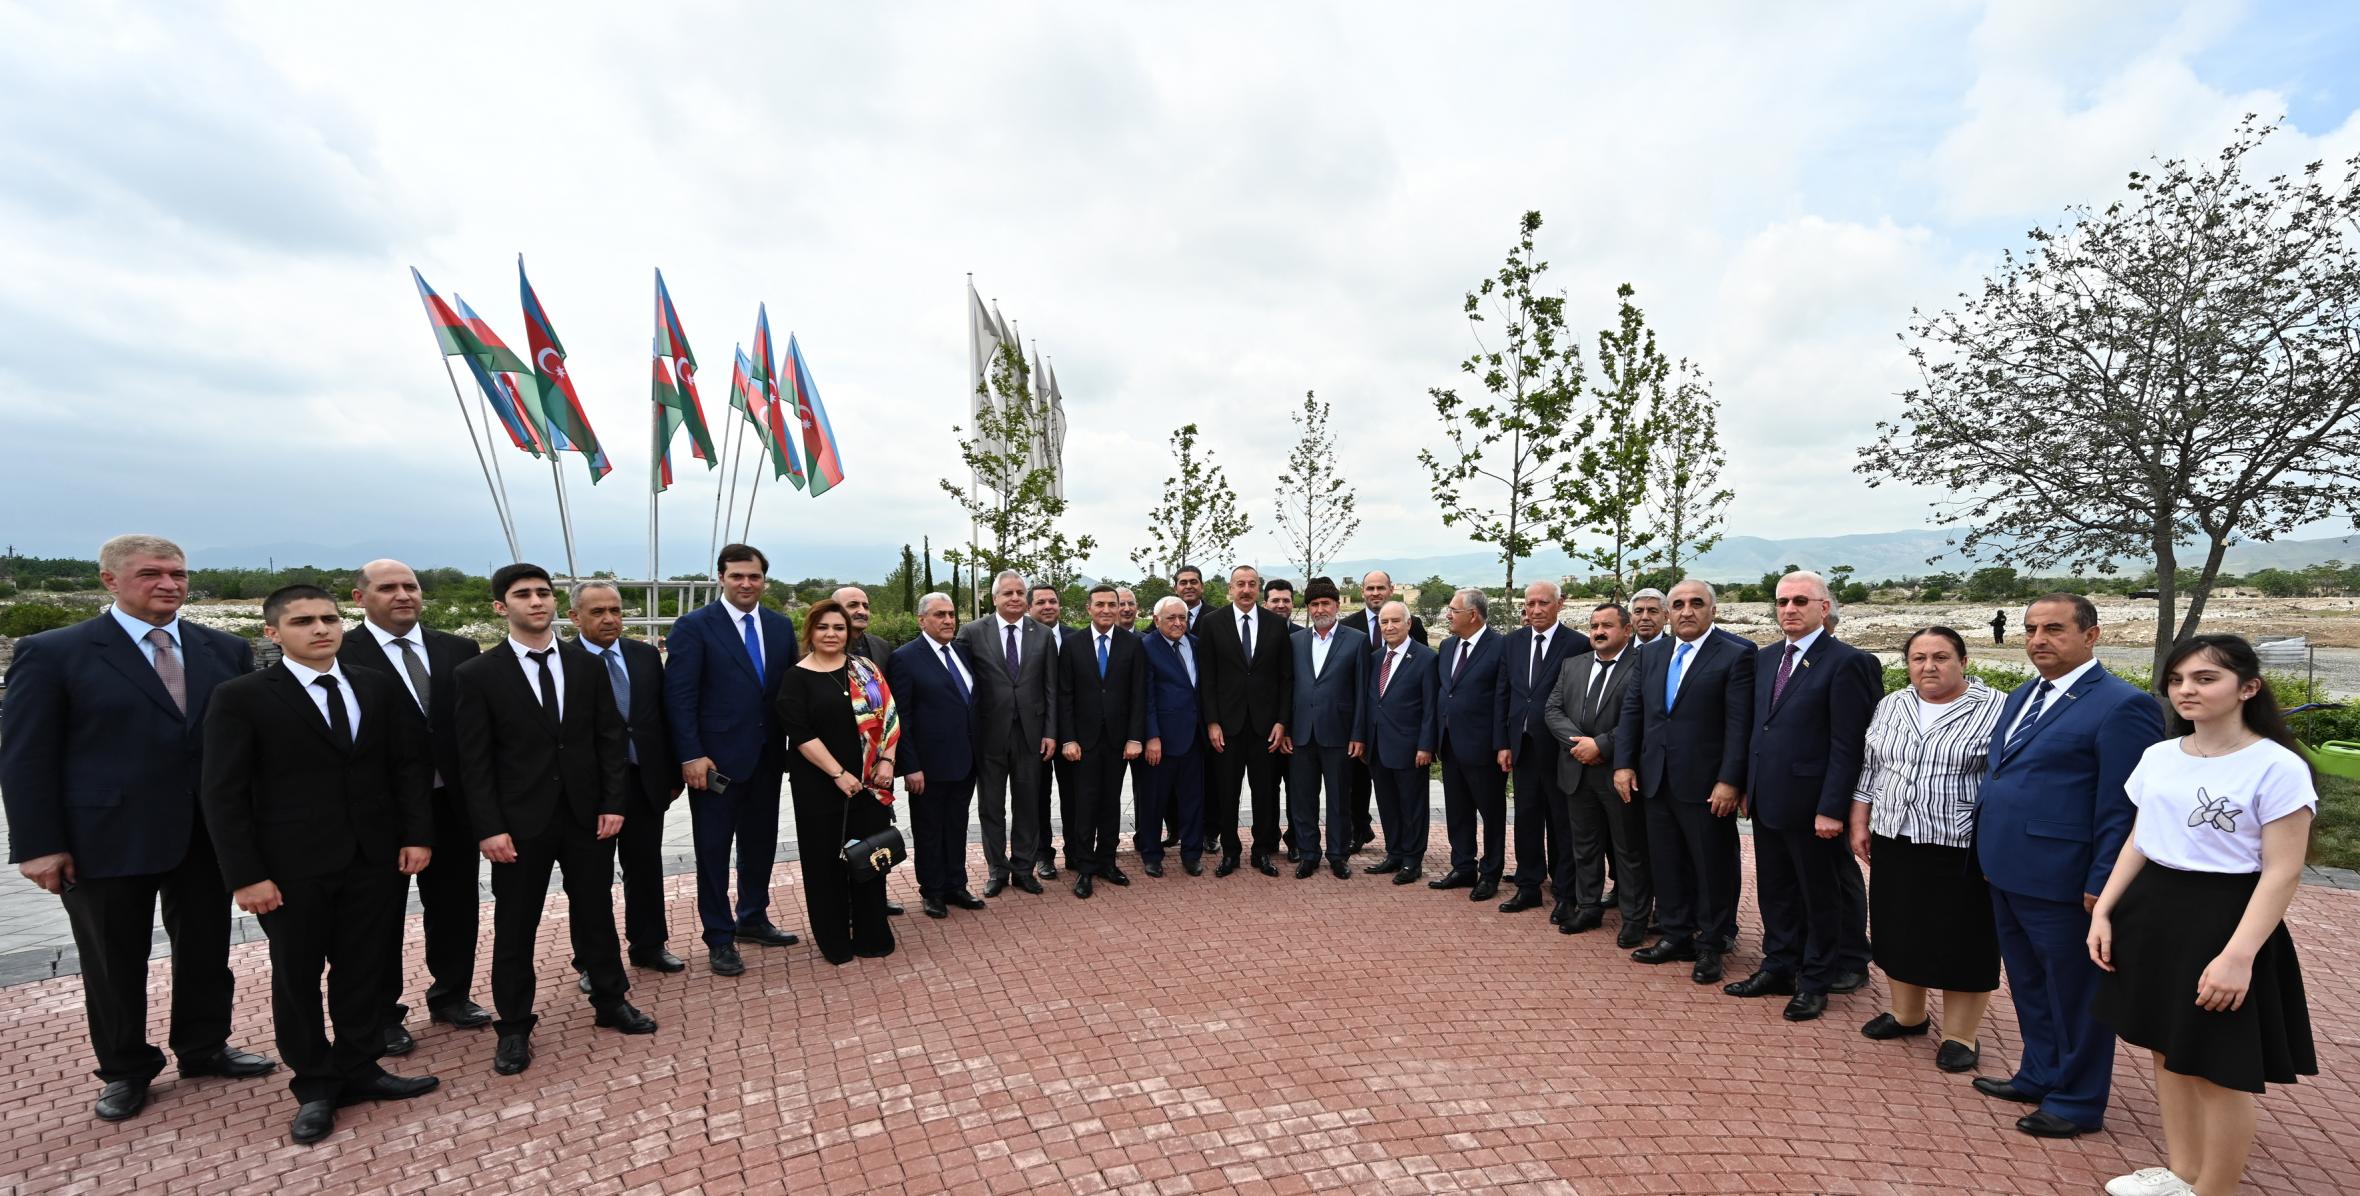 Ilham Aliyev attended ceremony to lay foundation stone for restoration of Aghdam city, met with members of general public